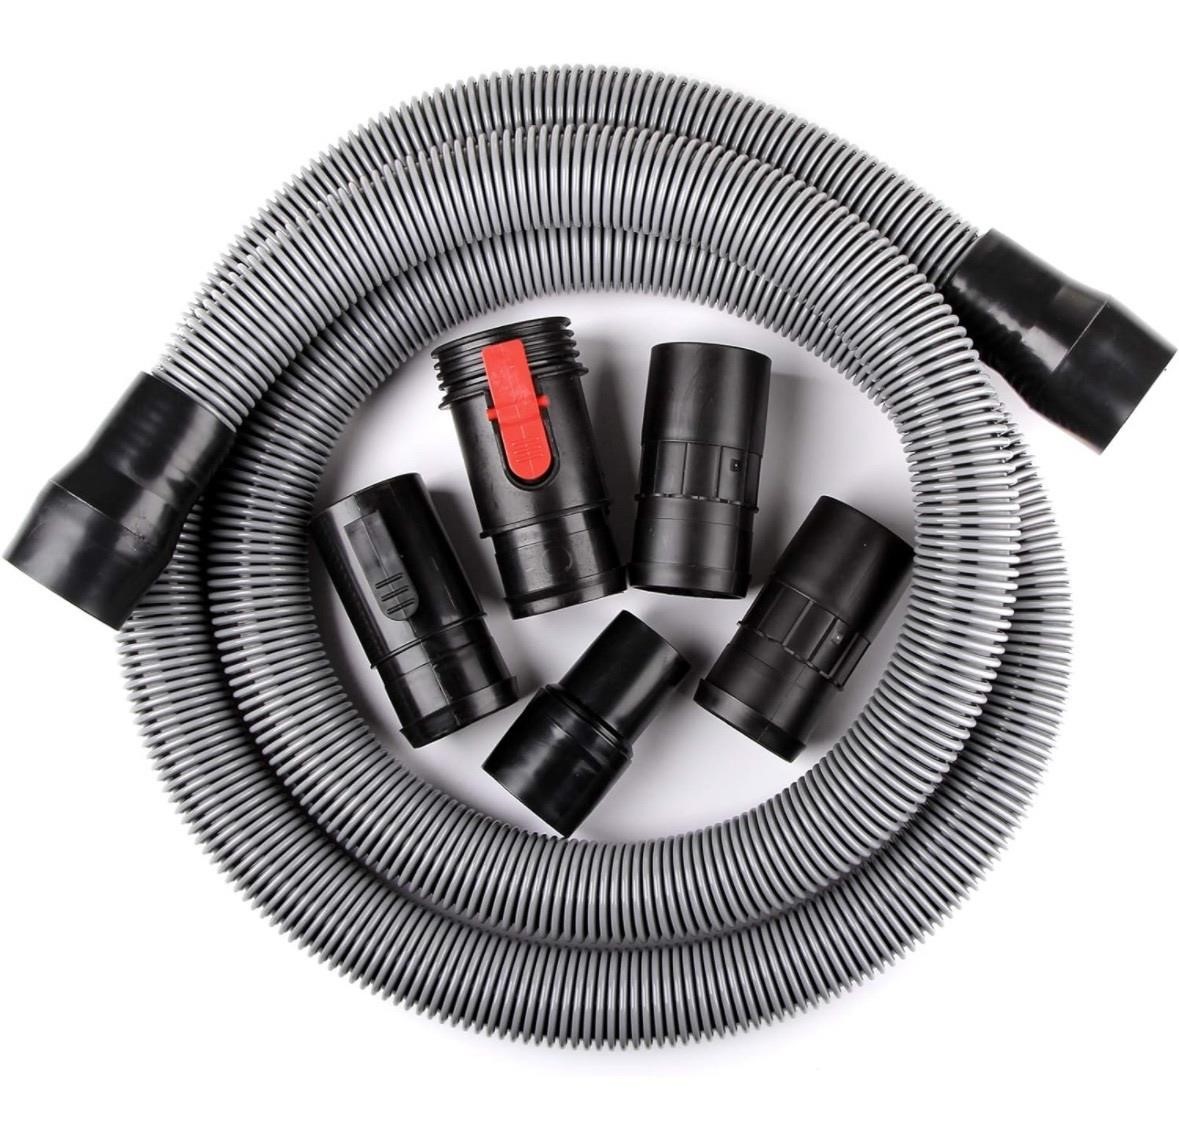 NEW $122 10FT Contractor Hose for Wet Dry Shop Vac